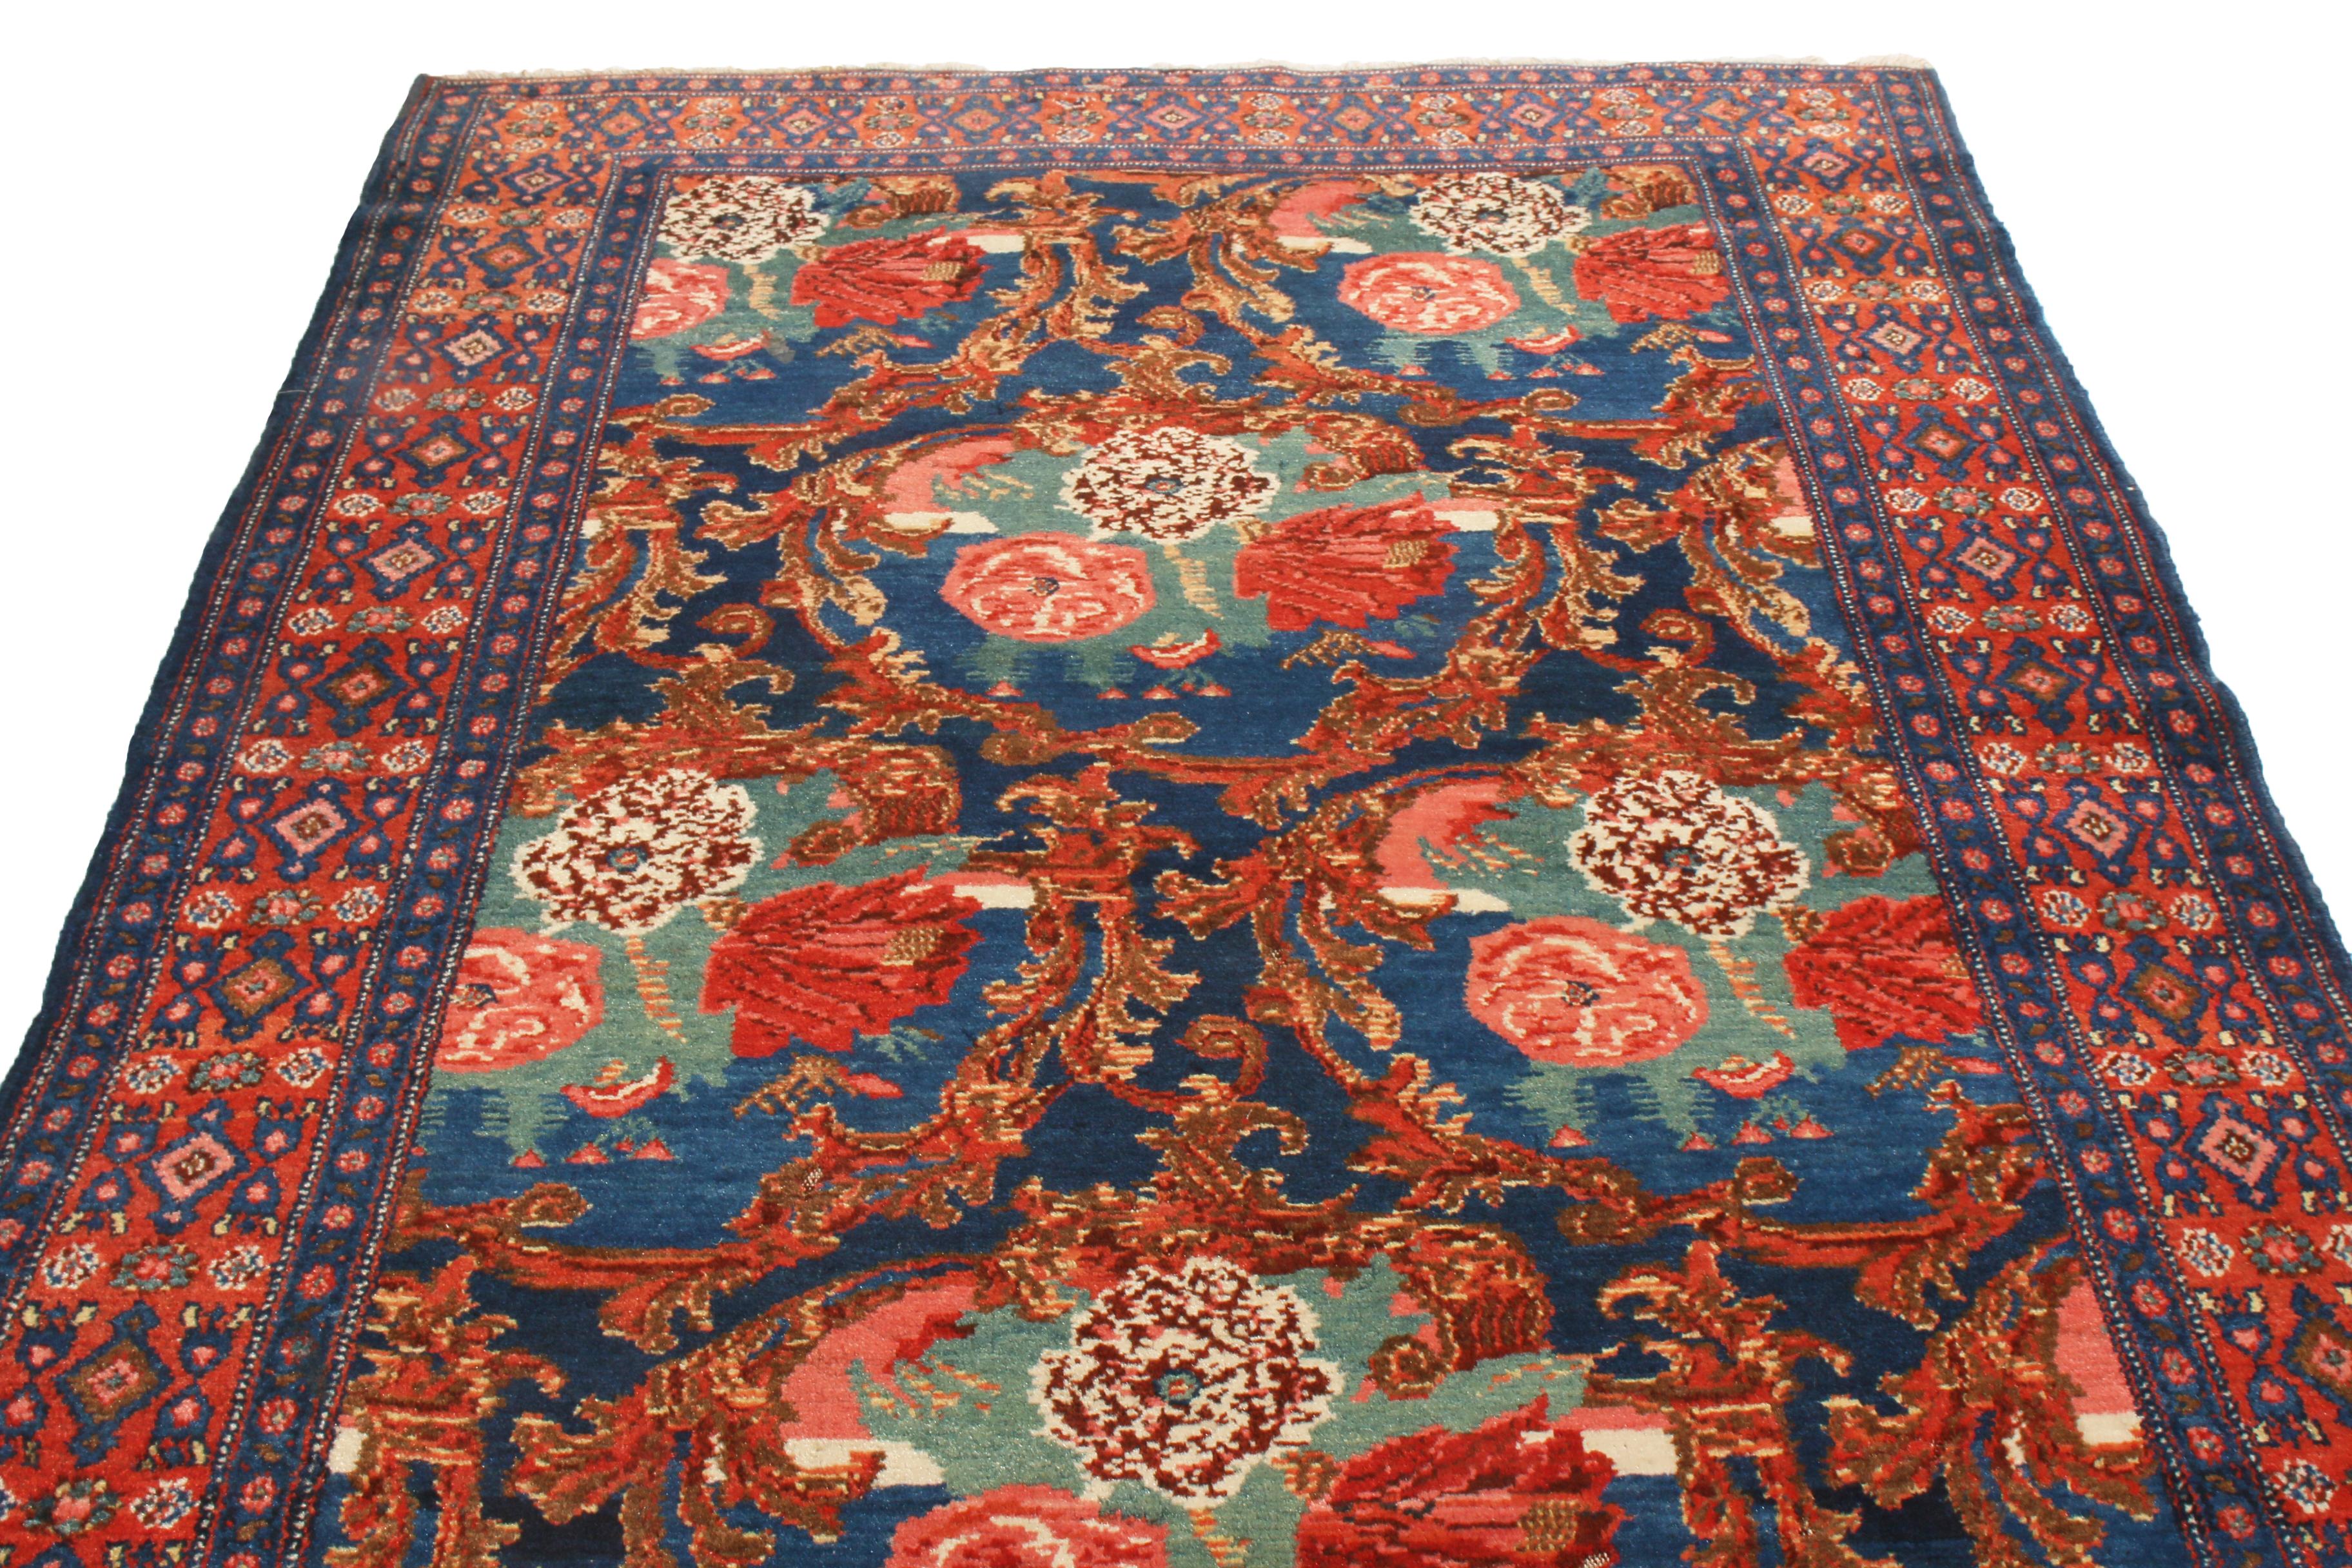 Originating from Persia in 1910, this antique traditional Senneh Persian rug enjoys a distinguished array of colorways in an all-over field pattern. Hand knotted in high-quality wool, the finely woven floral carnations in the field represent the